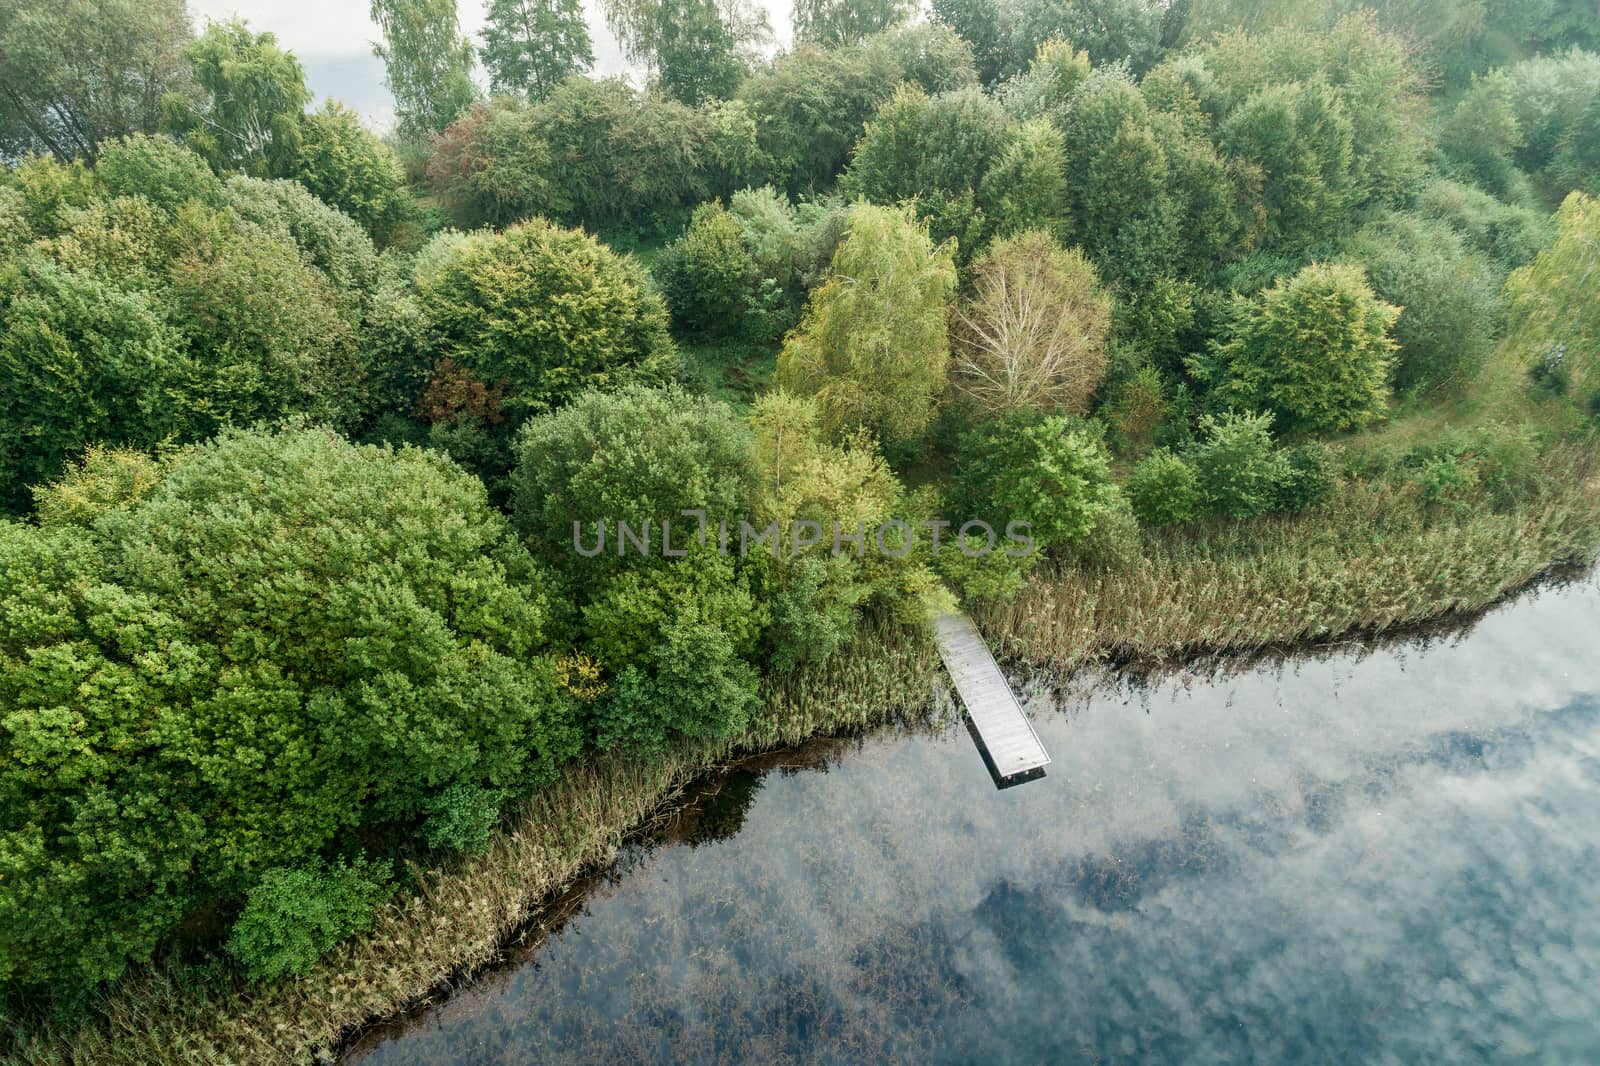 Photo taken from the air with the drone, fishing jetty at a pond with cloud reflections and a forest with green trees on the shore.